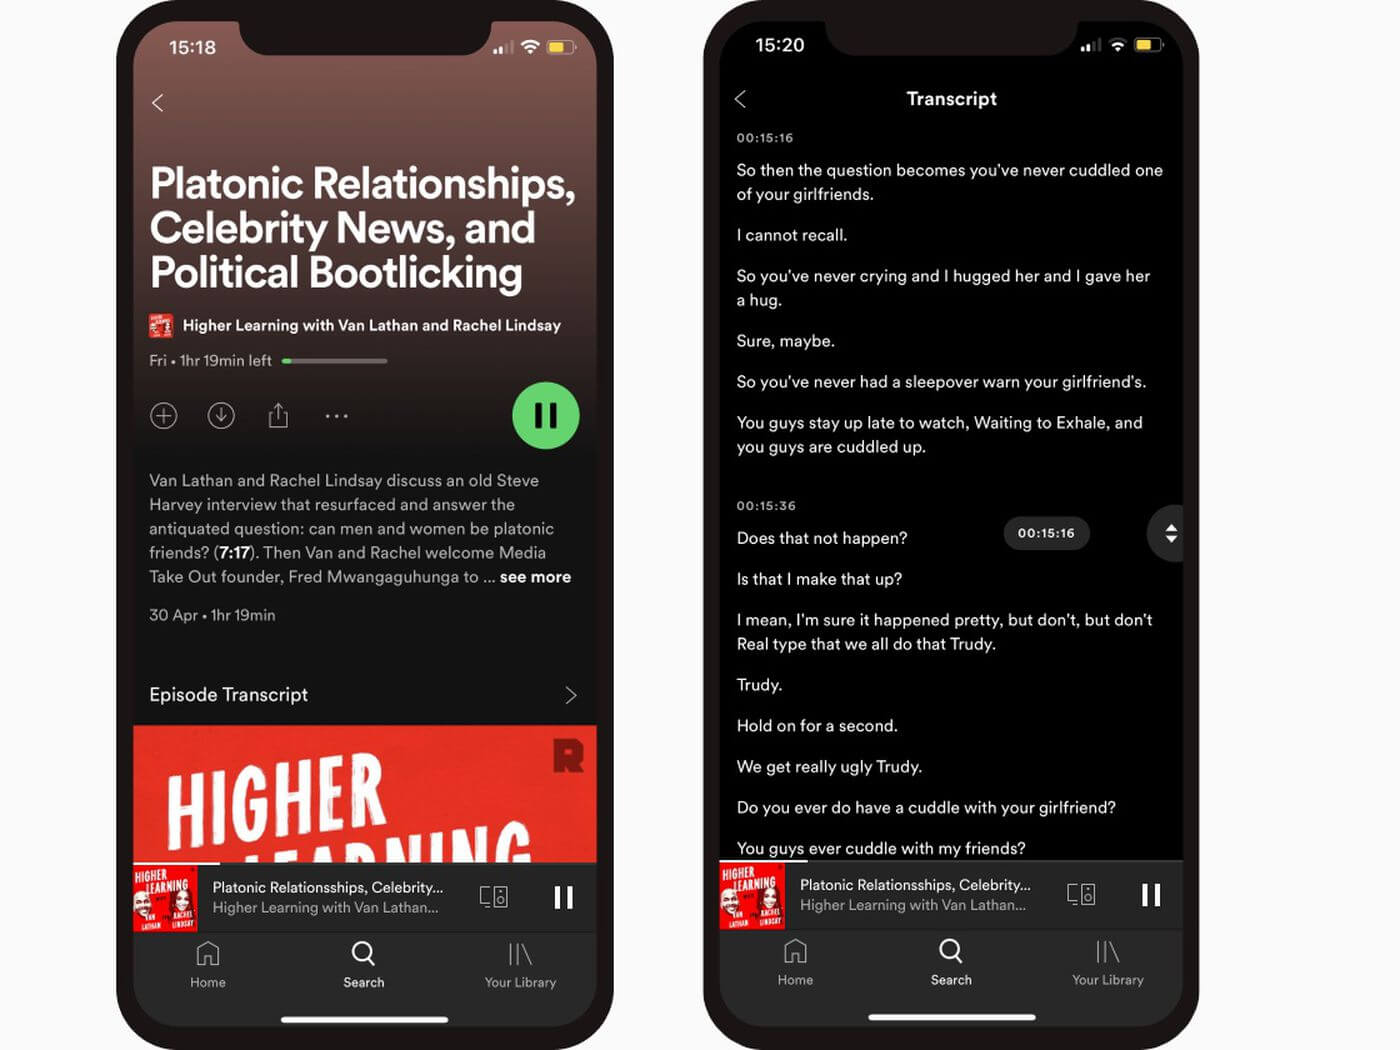 Spotify Announces New Transcription Feature For Podcasts - Good e-Reader